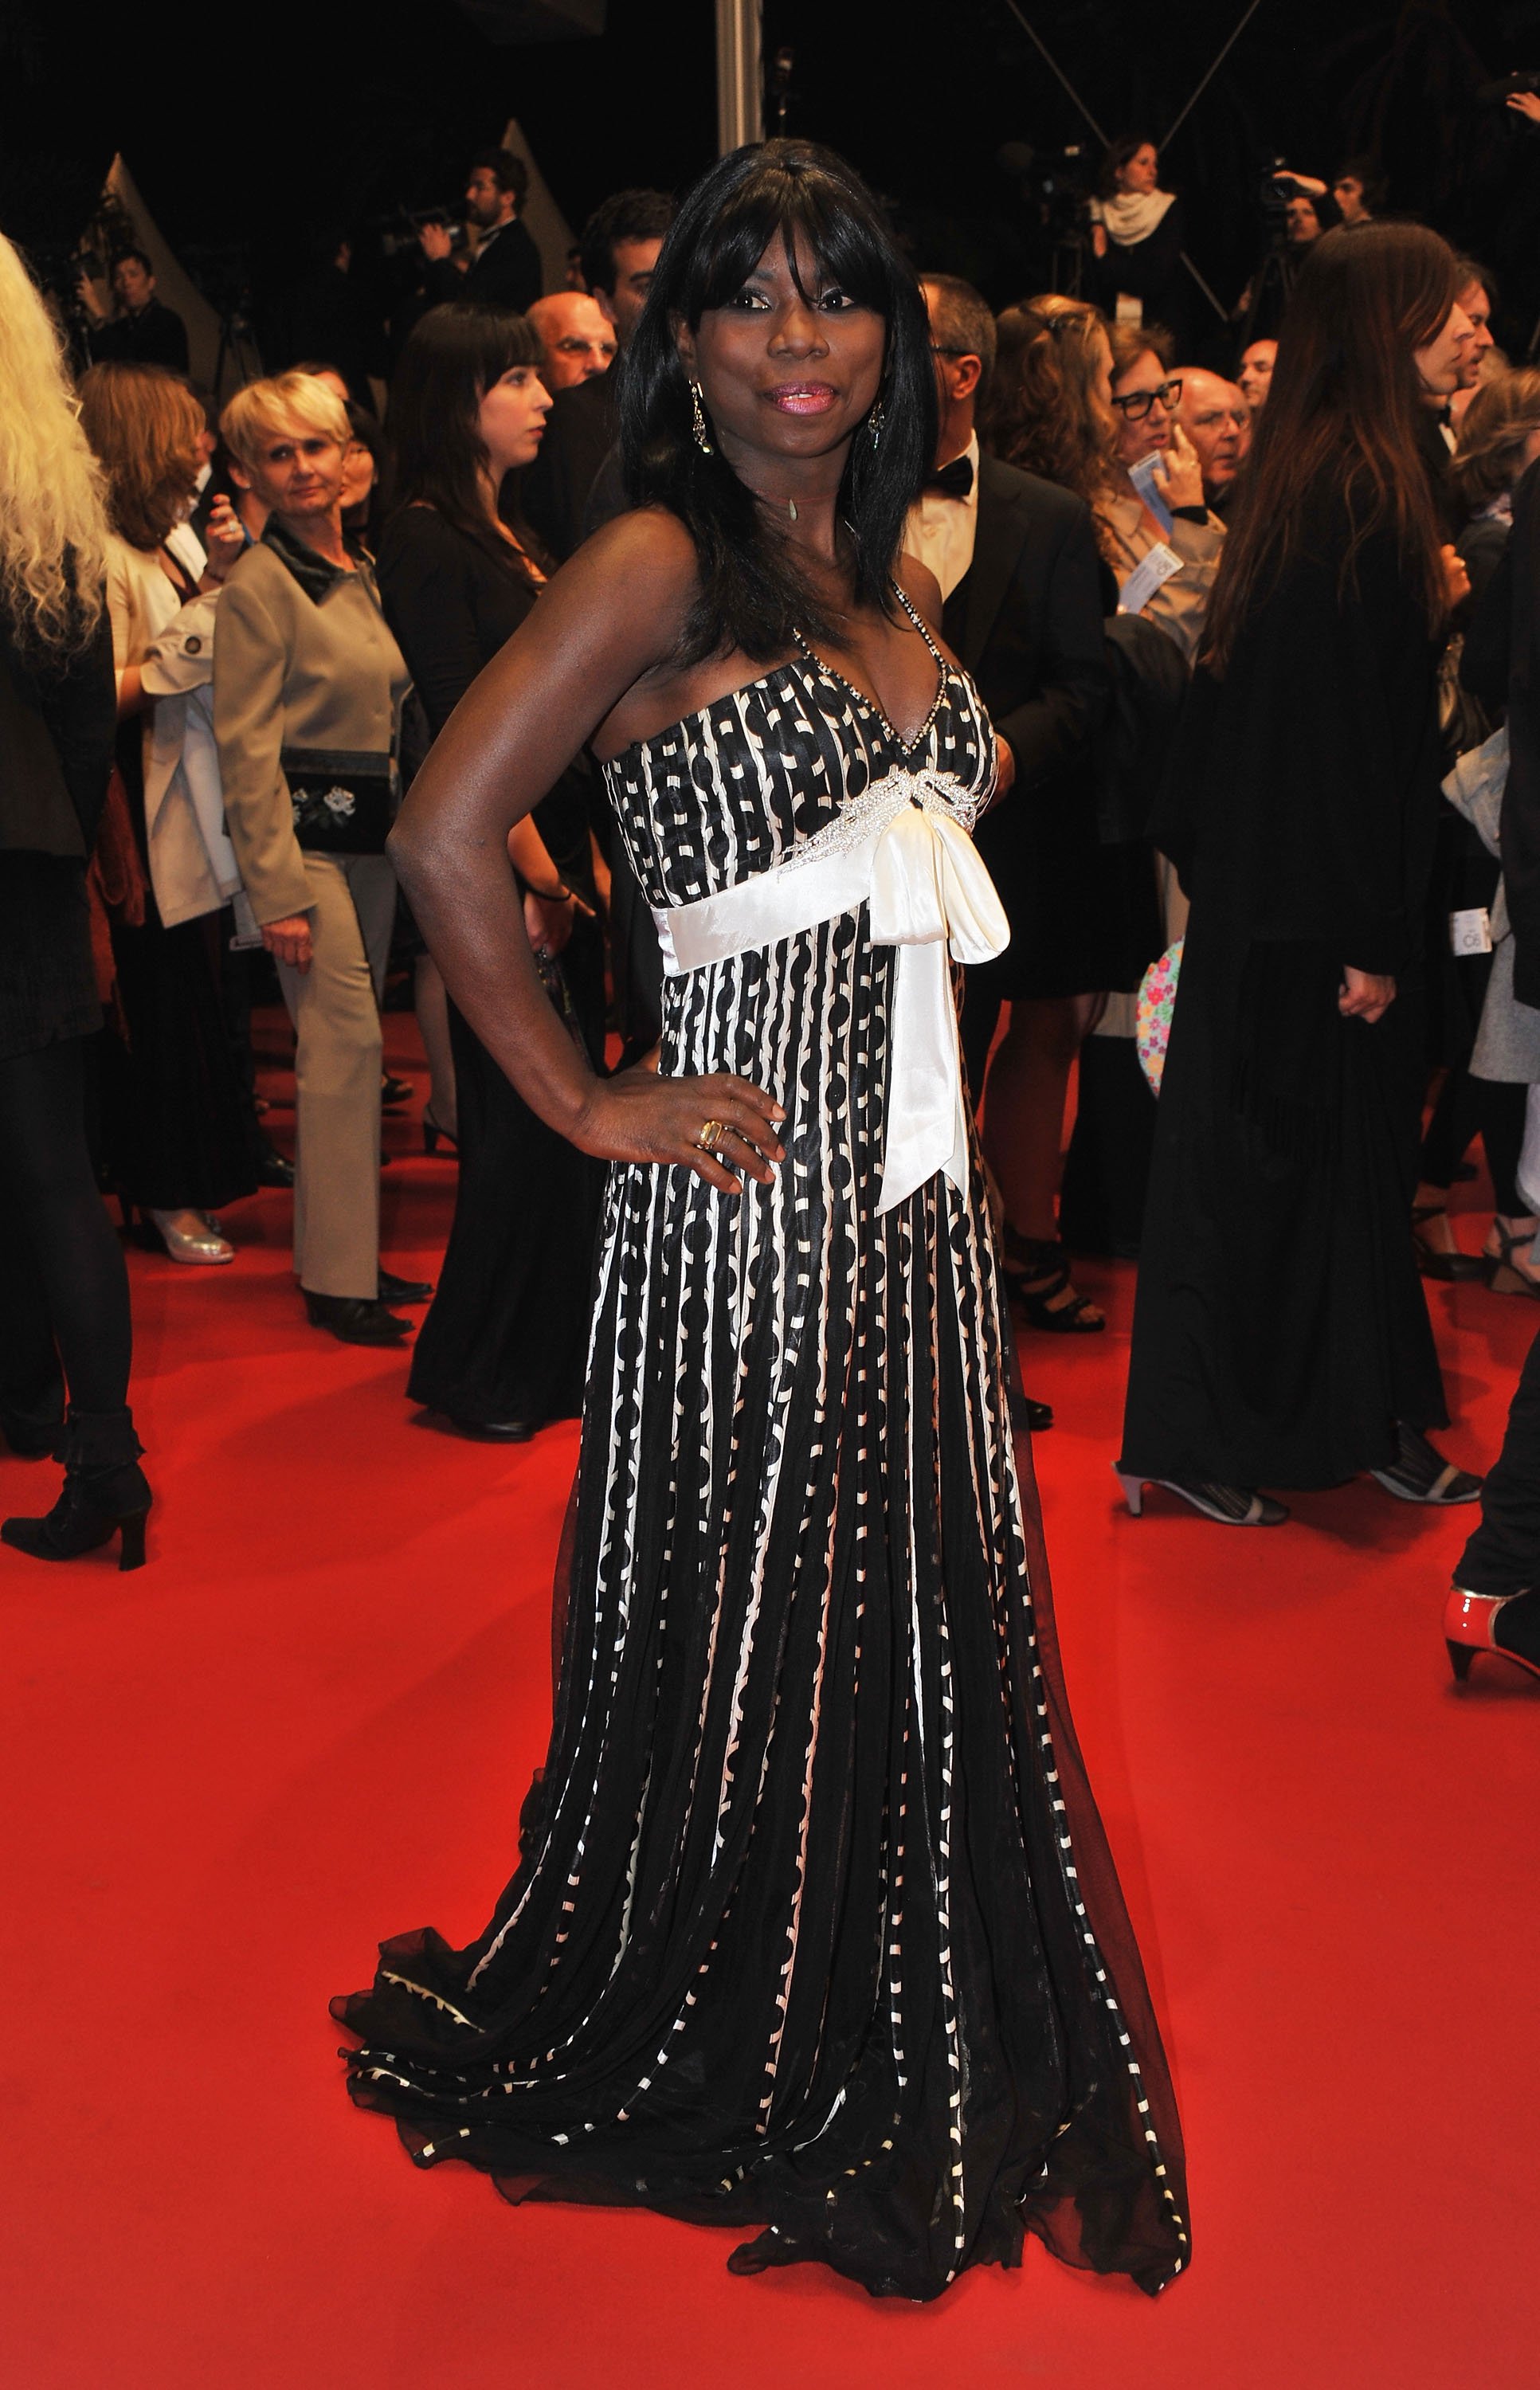 Figure skater Surya Bonaly departs the "Another Year" Premiere at the Palais des Festivals during the 63rd Annual Cannes Film Festival on May 15, 2010 | Photo: Getty Images